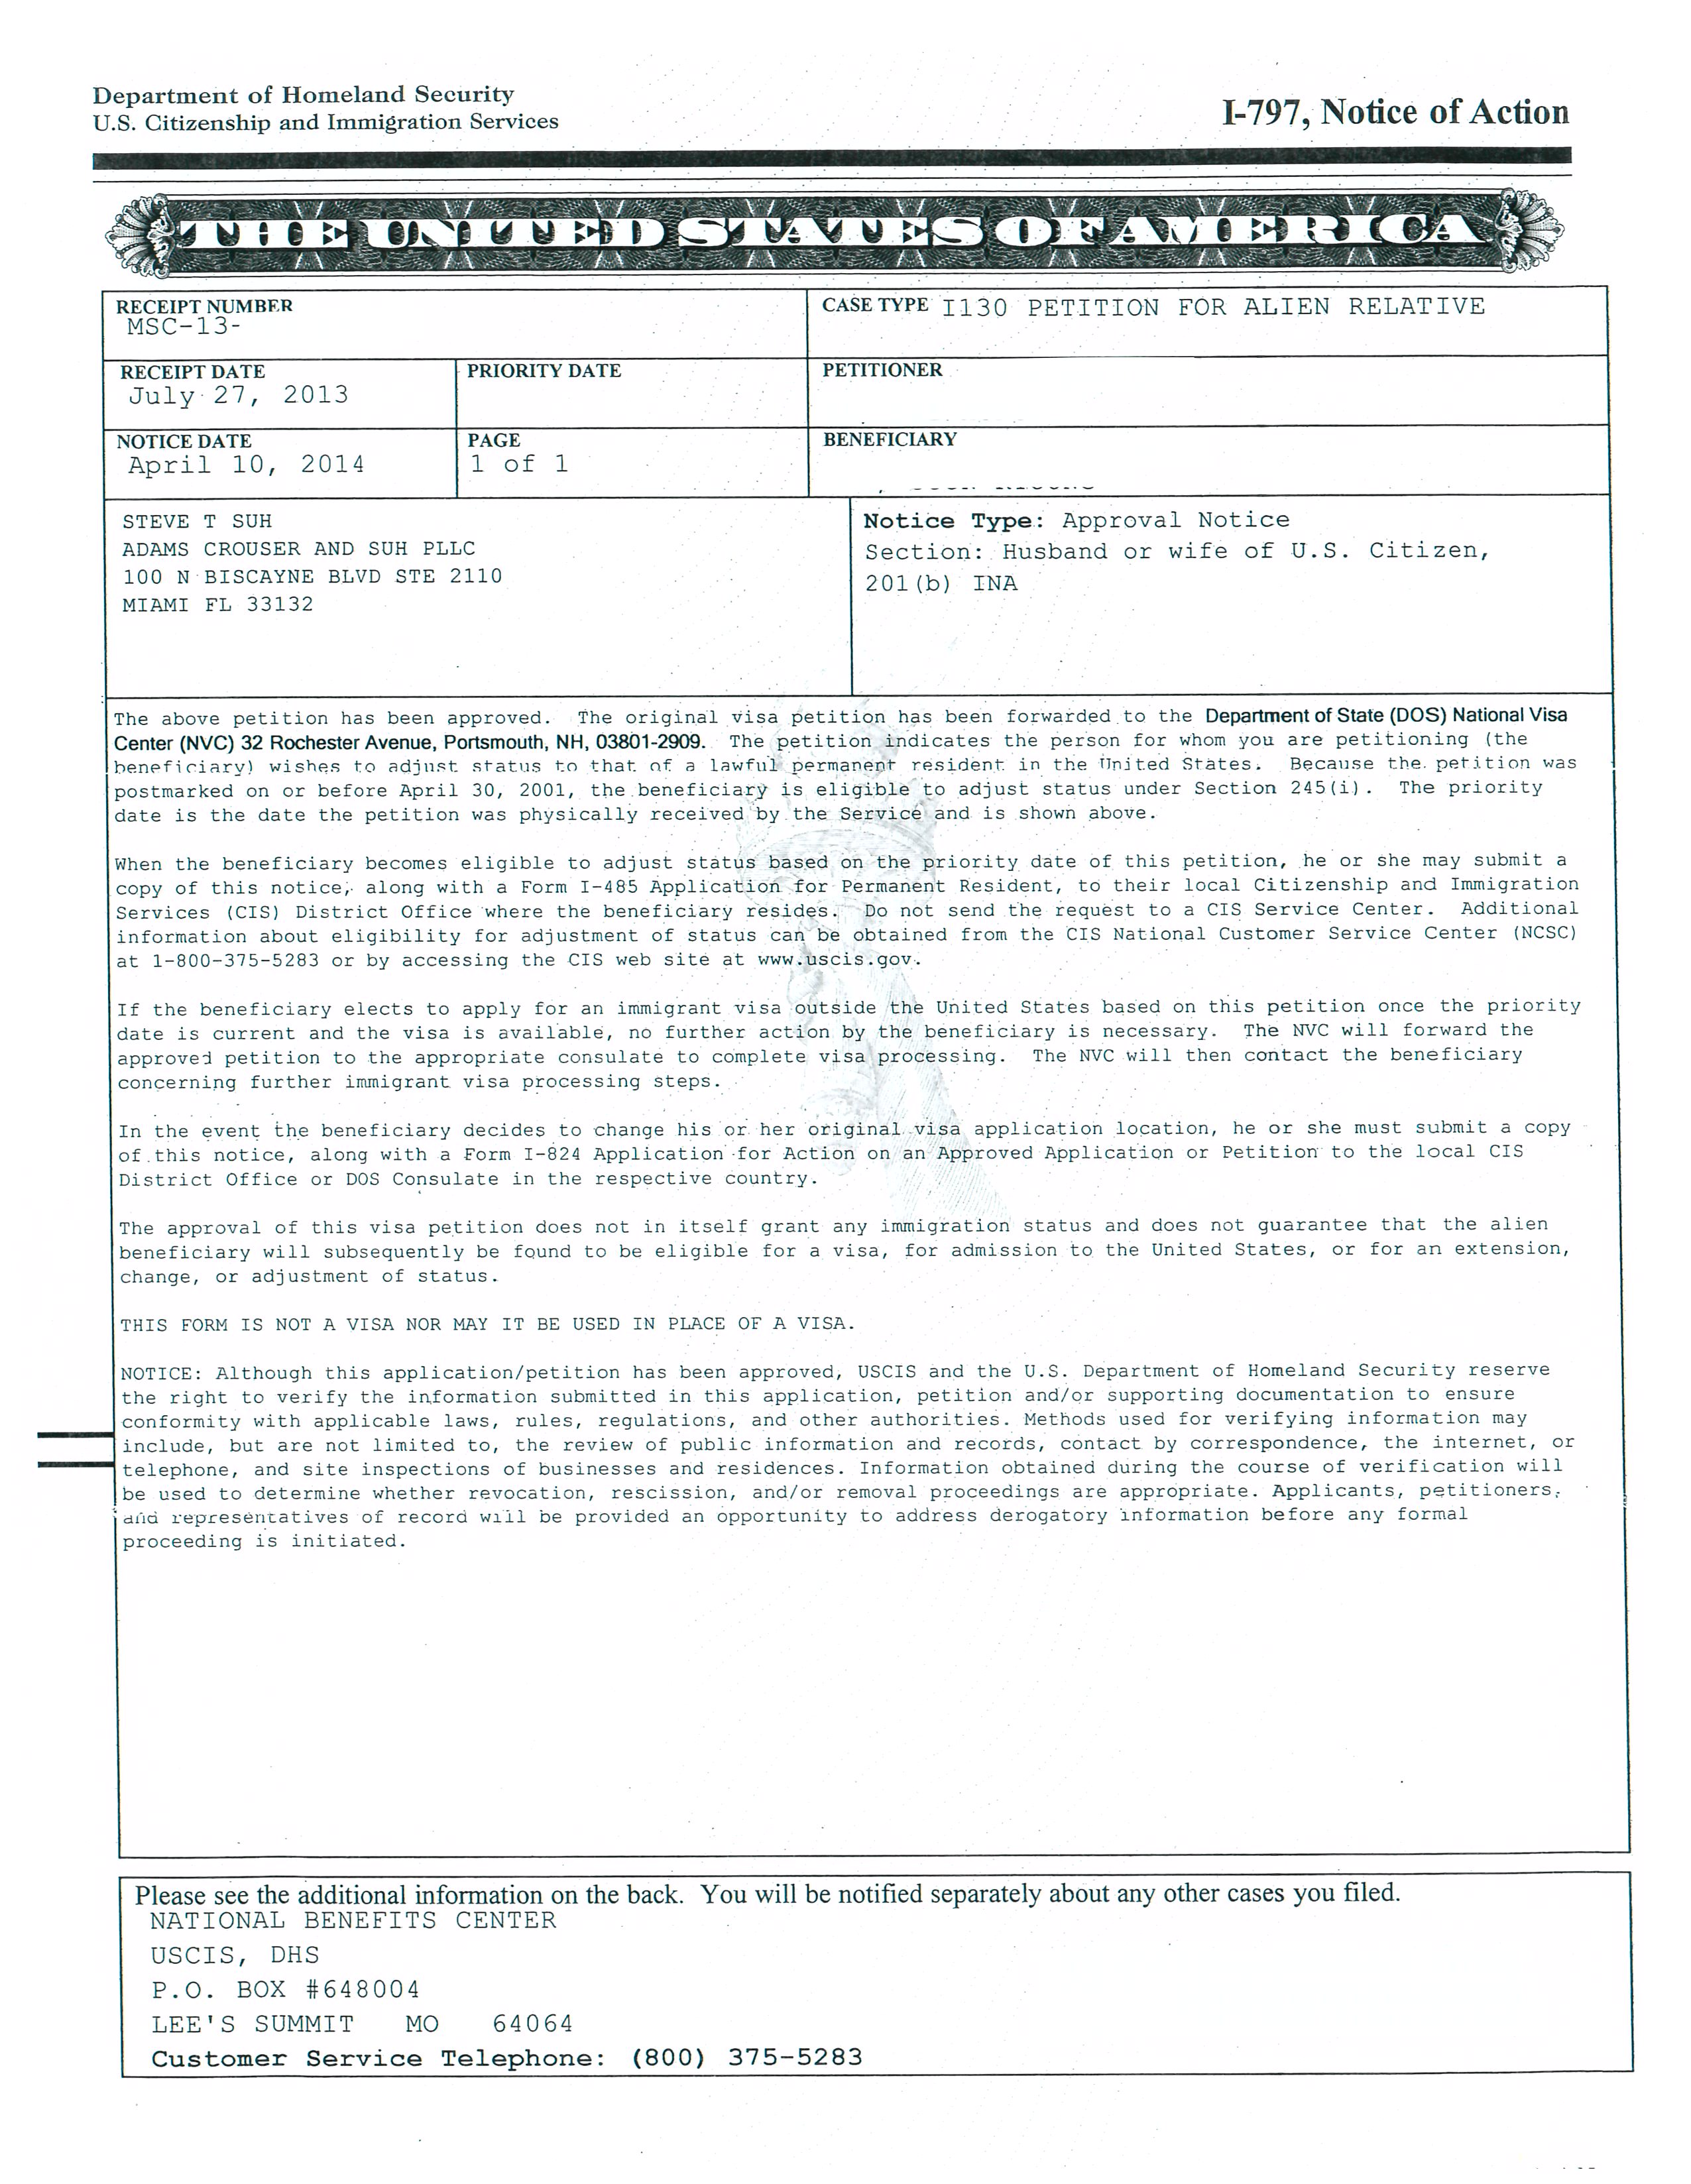 marriagepetitionapprovalnotice04102014.jpg